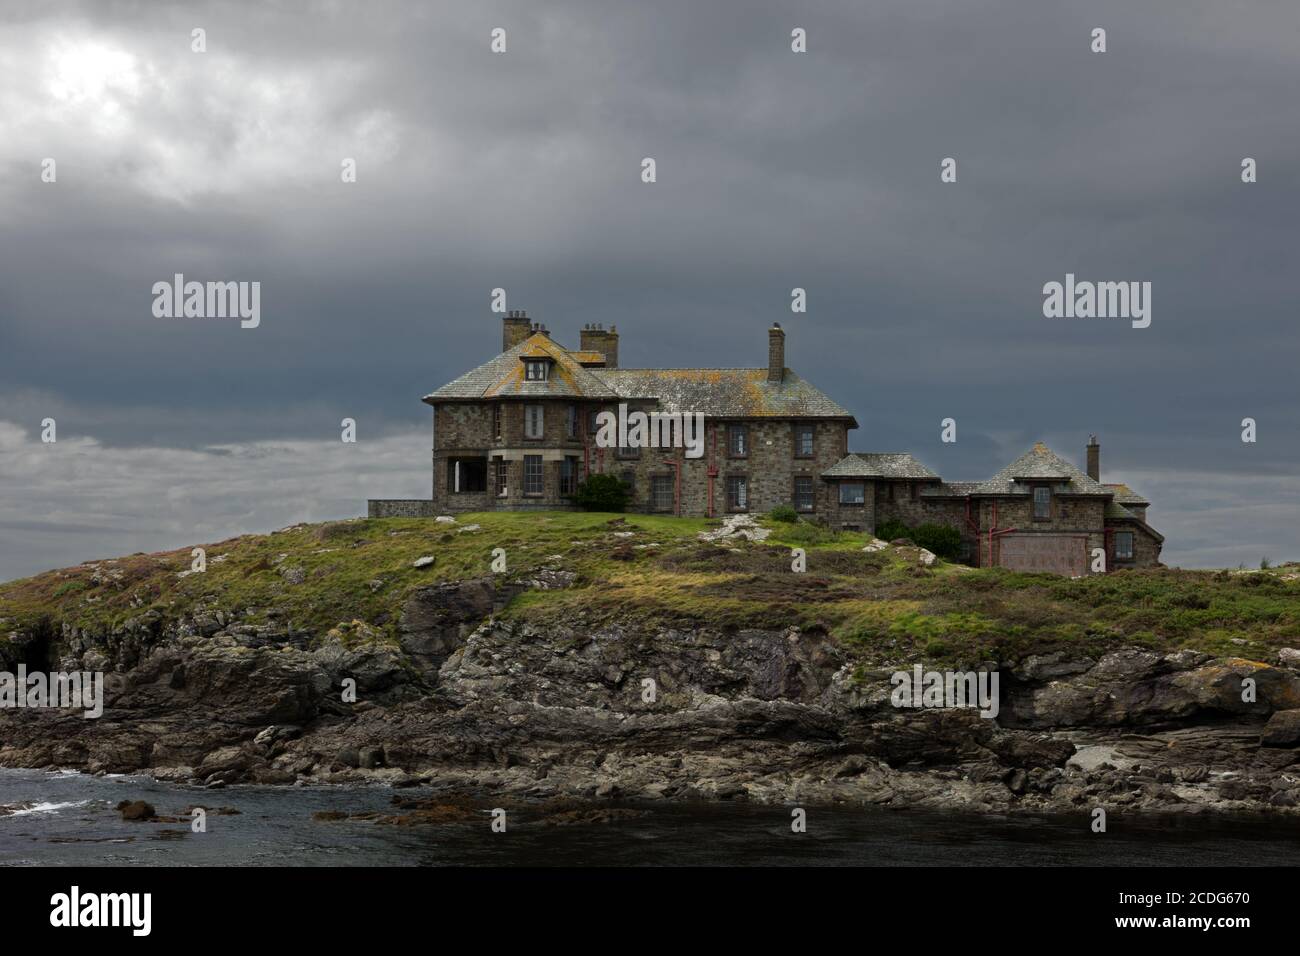 Craig y Mor is a Grade II Listed Building in Trearddur Bay on the Isle of Anglesey. It was used in the TV series Safe House and said to be haunted. Stock Photo